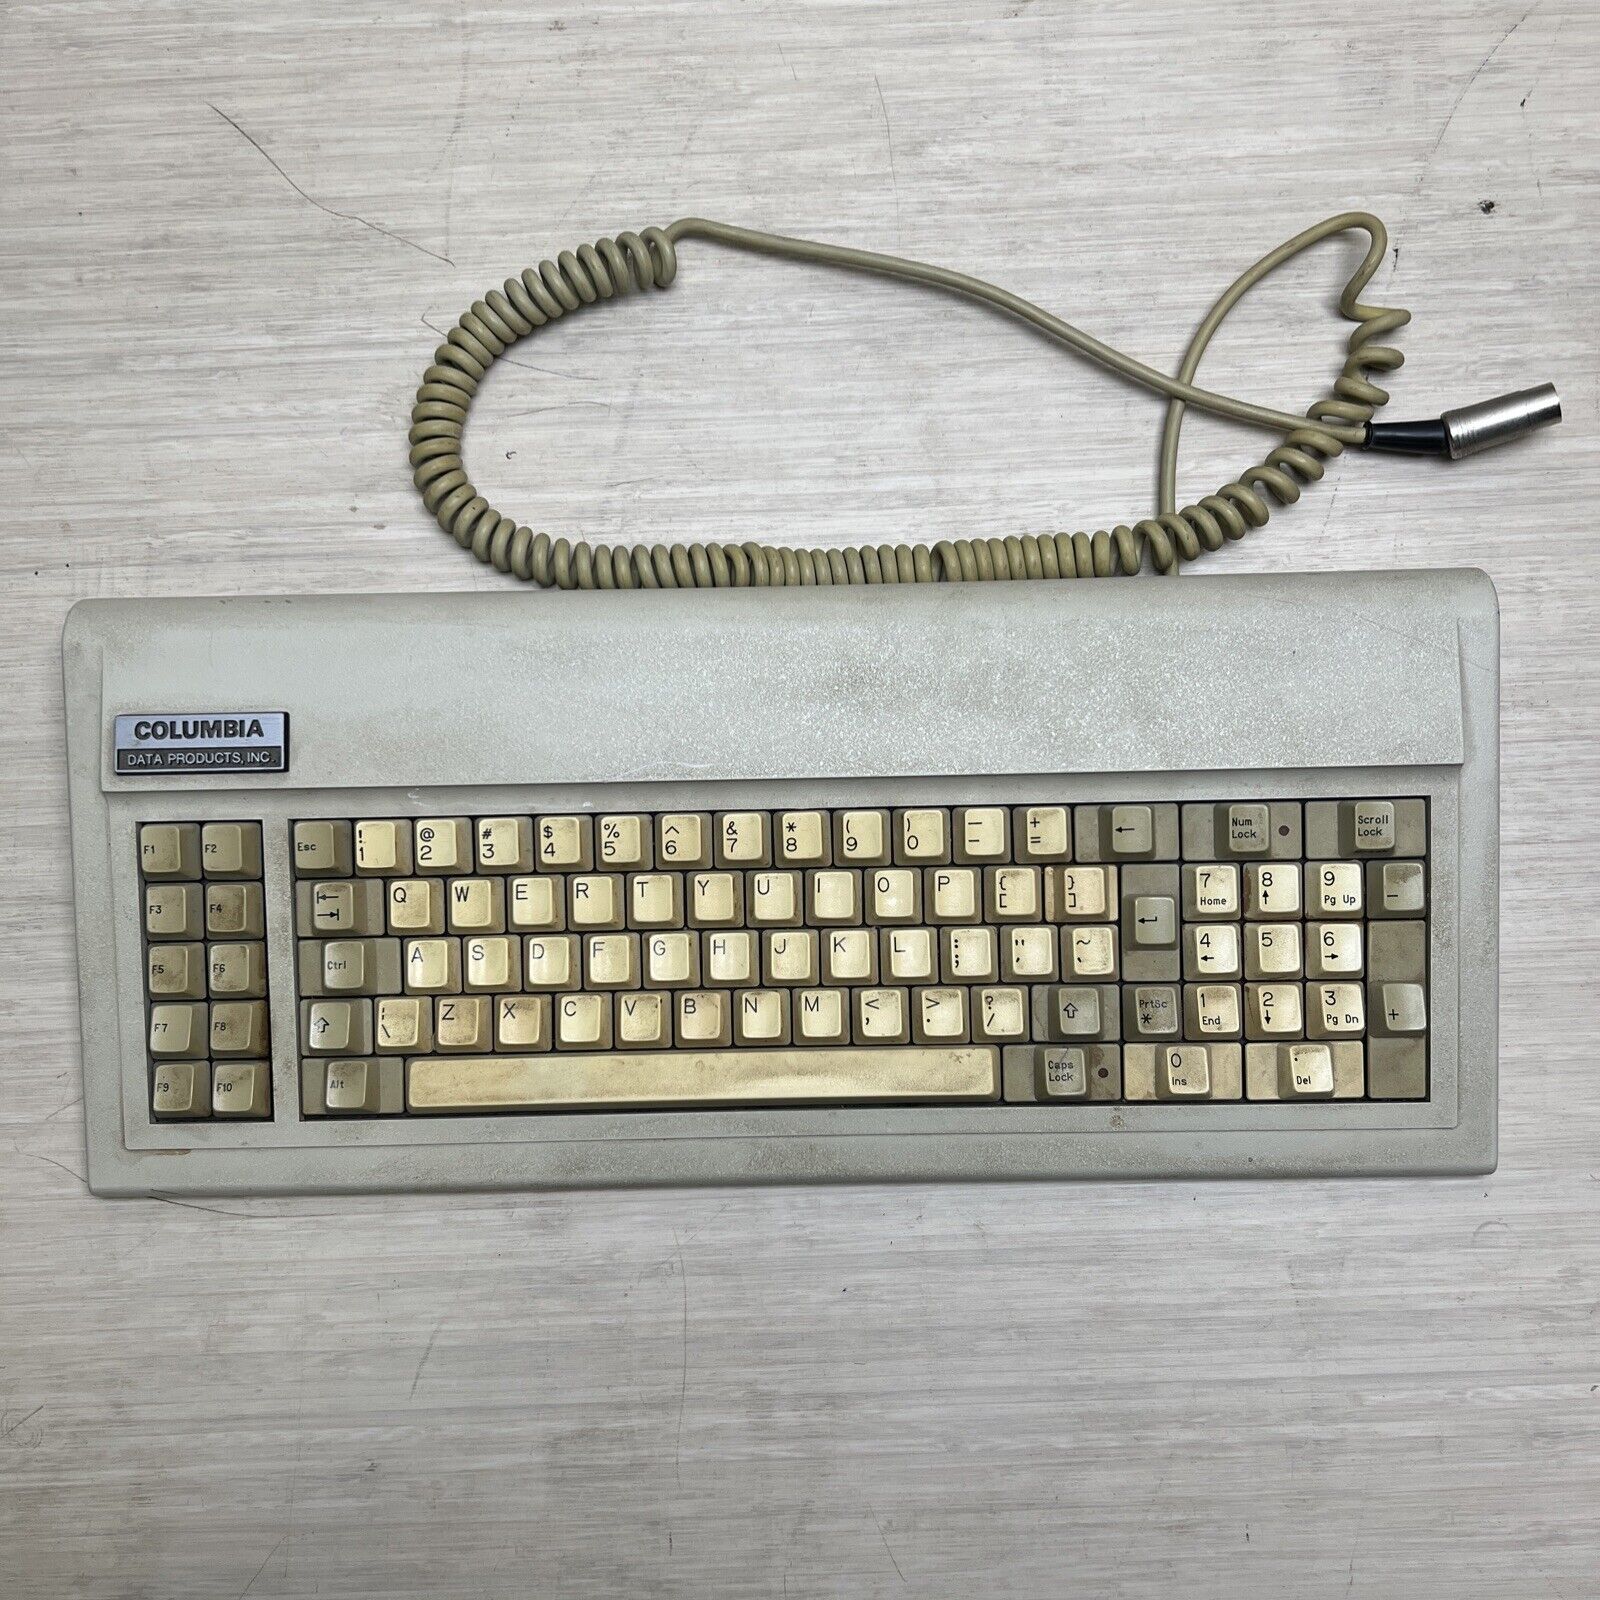 VINTAGE COLUMBIA DATA PRODUCTS IBM CLONE COMPUTER KEYBOARD Key Tronic FT04 PARTS